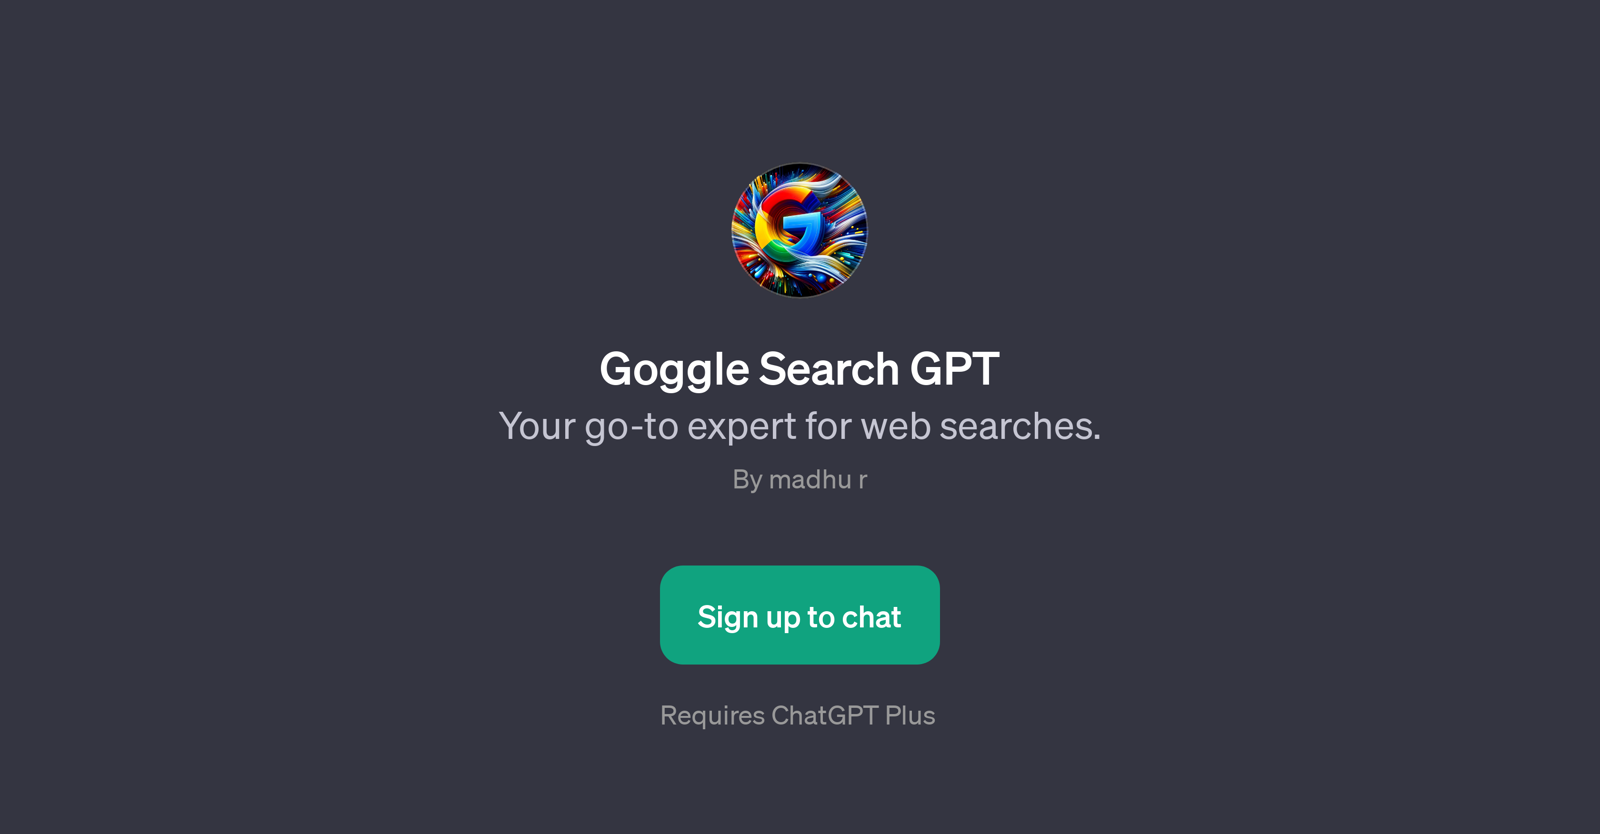 Goggle Search GPT website